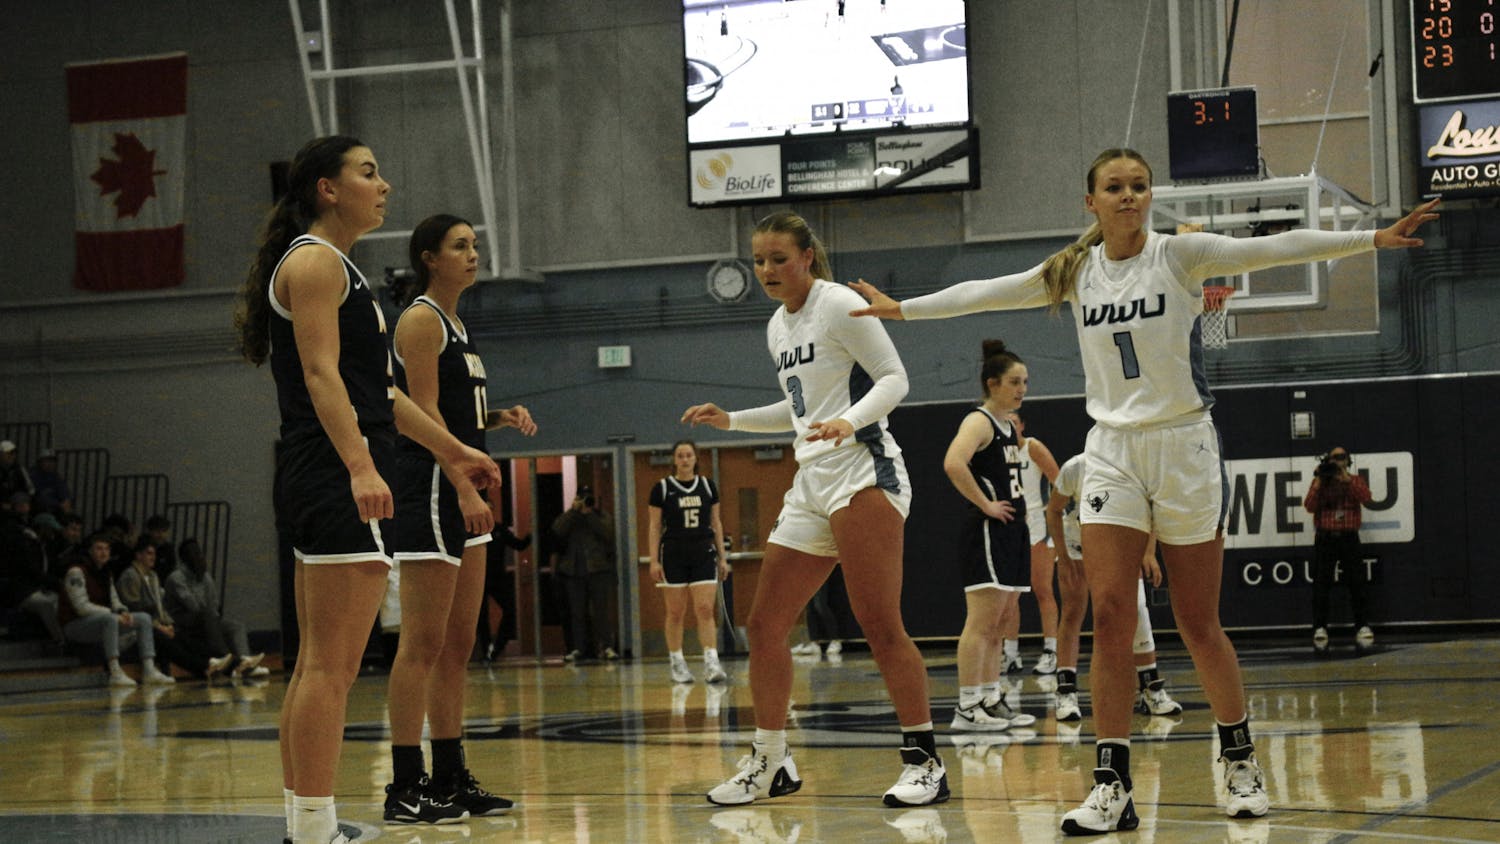 (1) Dykstra sisters adding to family legacy at WWU